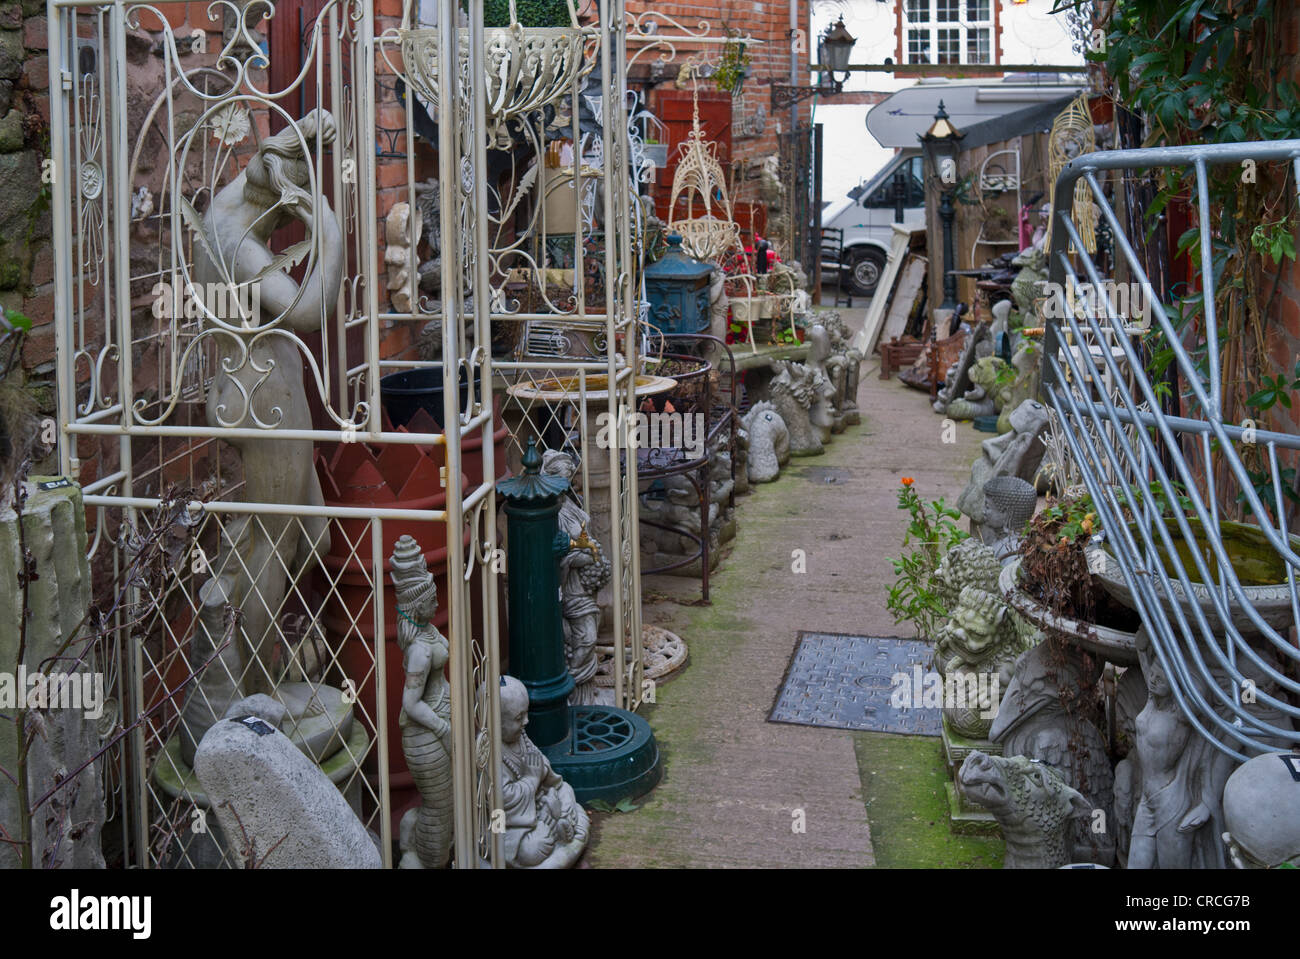 An eclectic collection of garden ornaments for sale in Mountsorrel Stock Photo